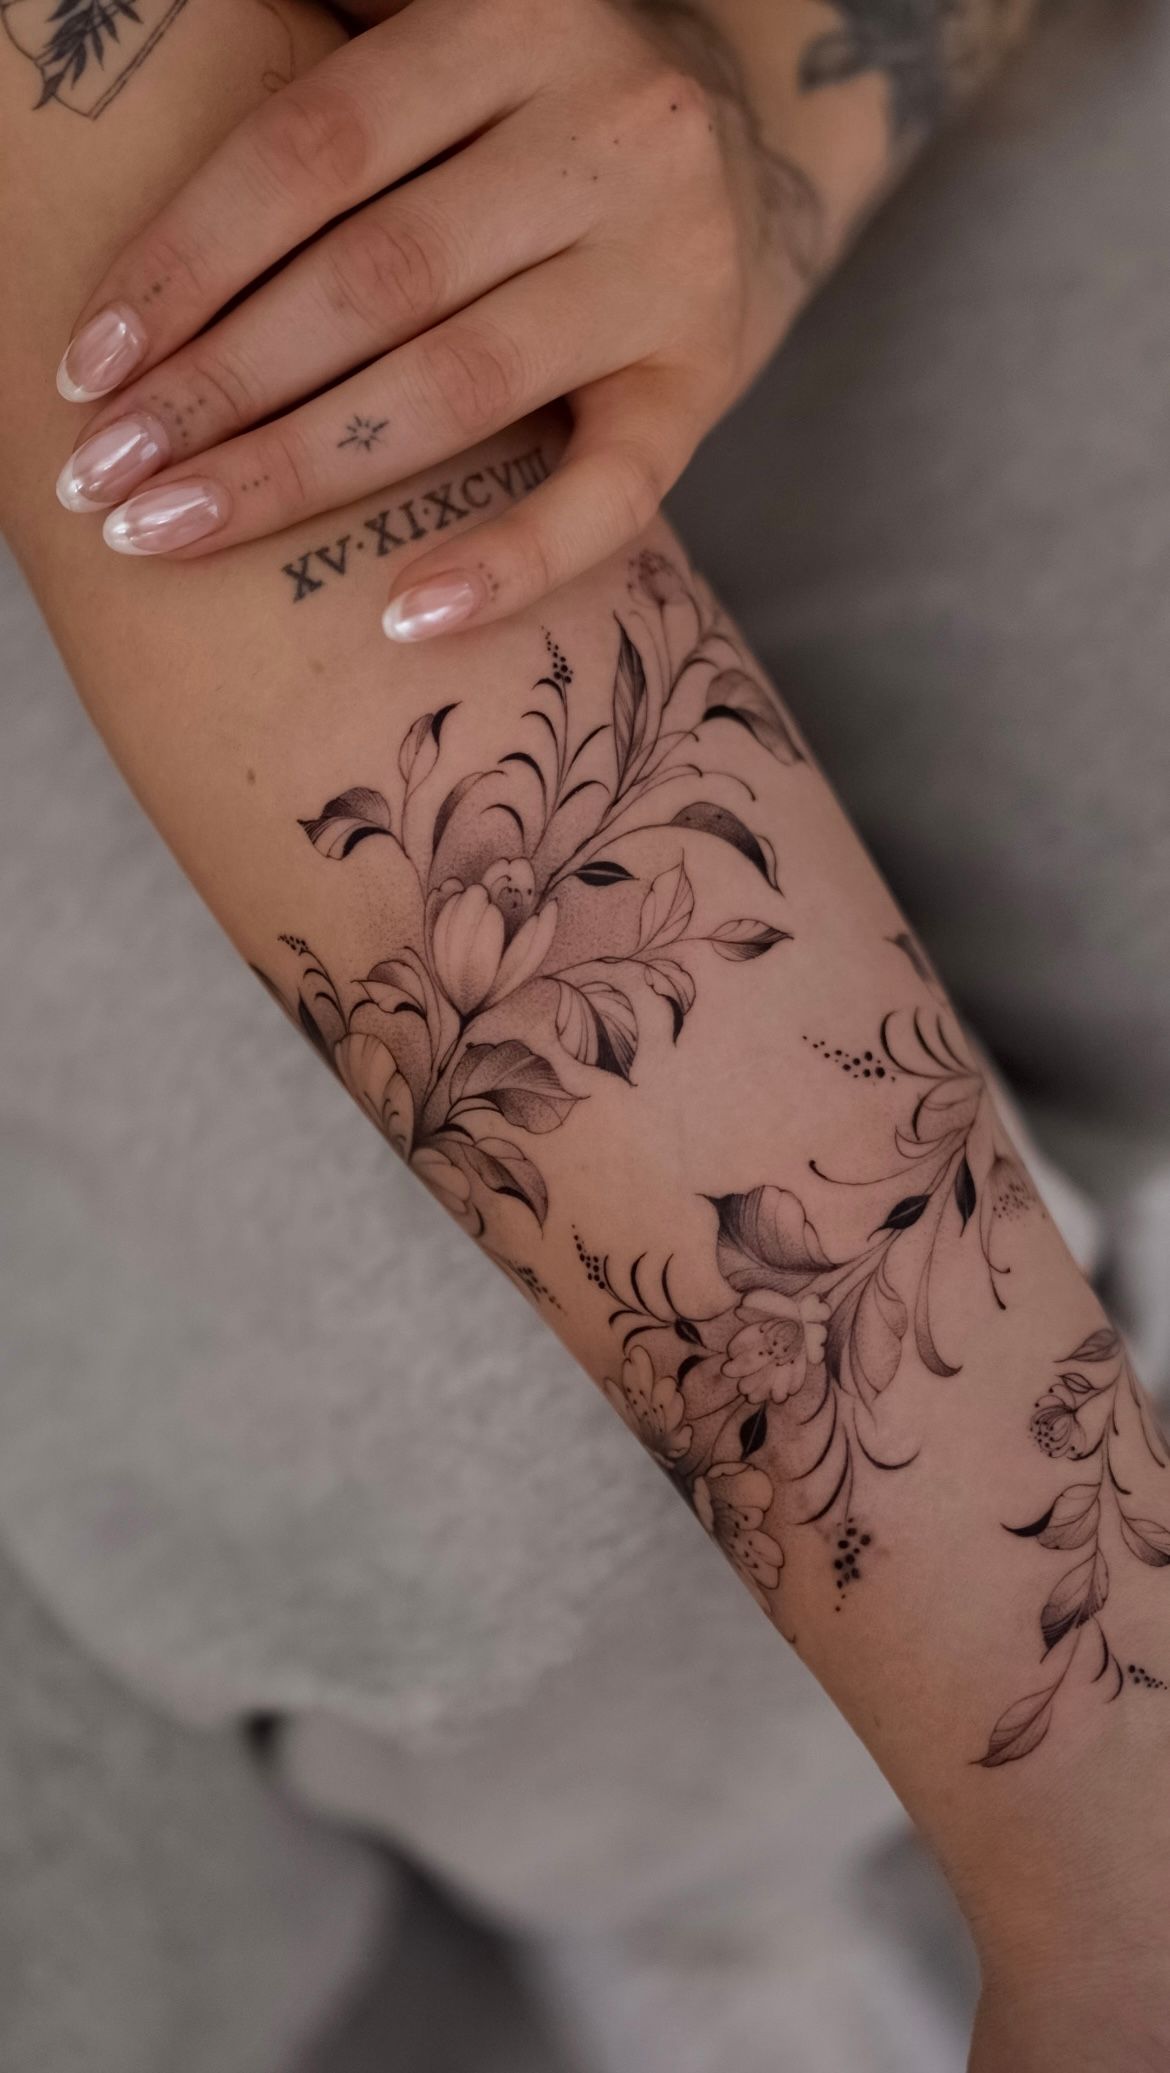 14 Female Meaningful Forearm Tattoos That Will Make You Stand Out | Styled